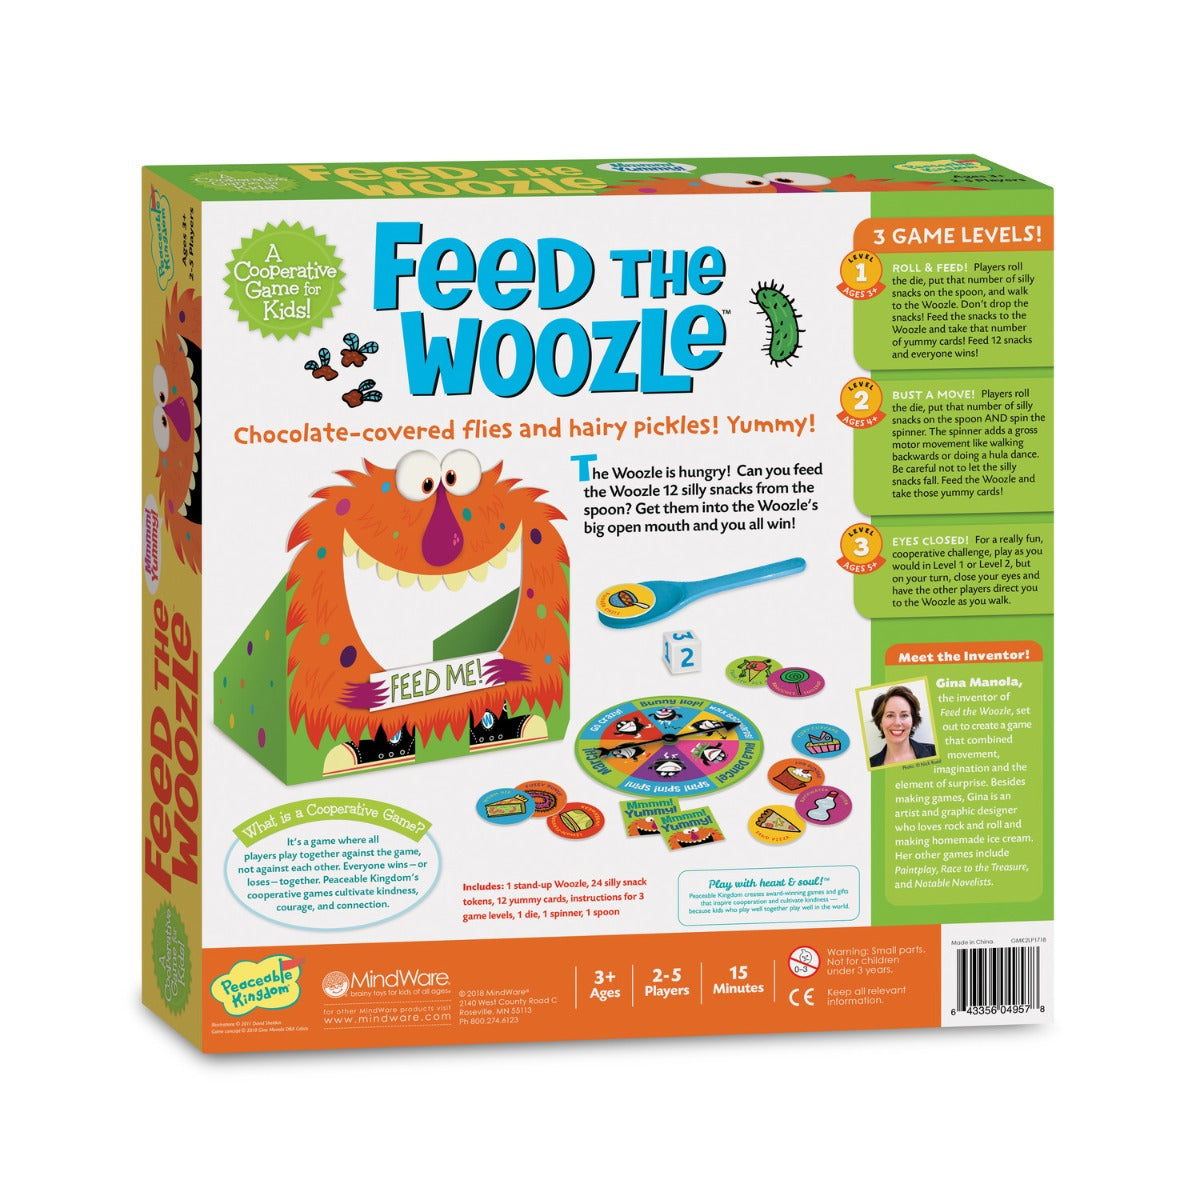 Feed the Woozle - A Peaceable Kingdom Cooperative Game